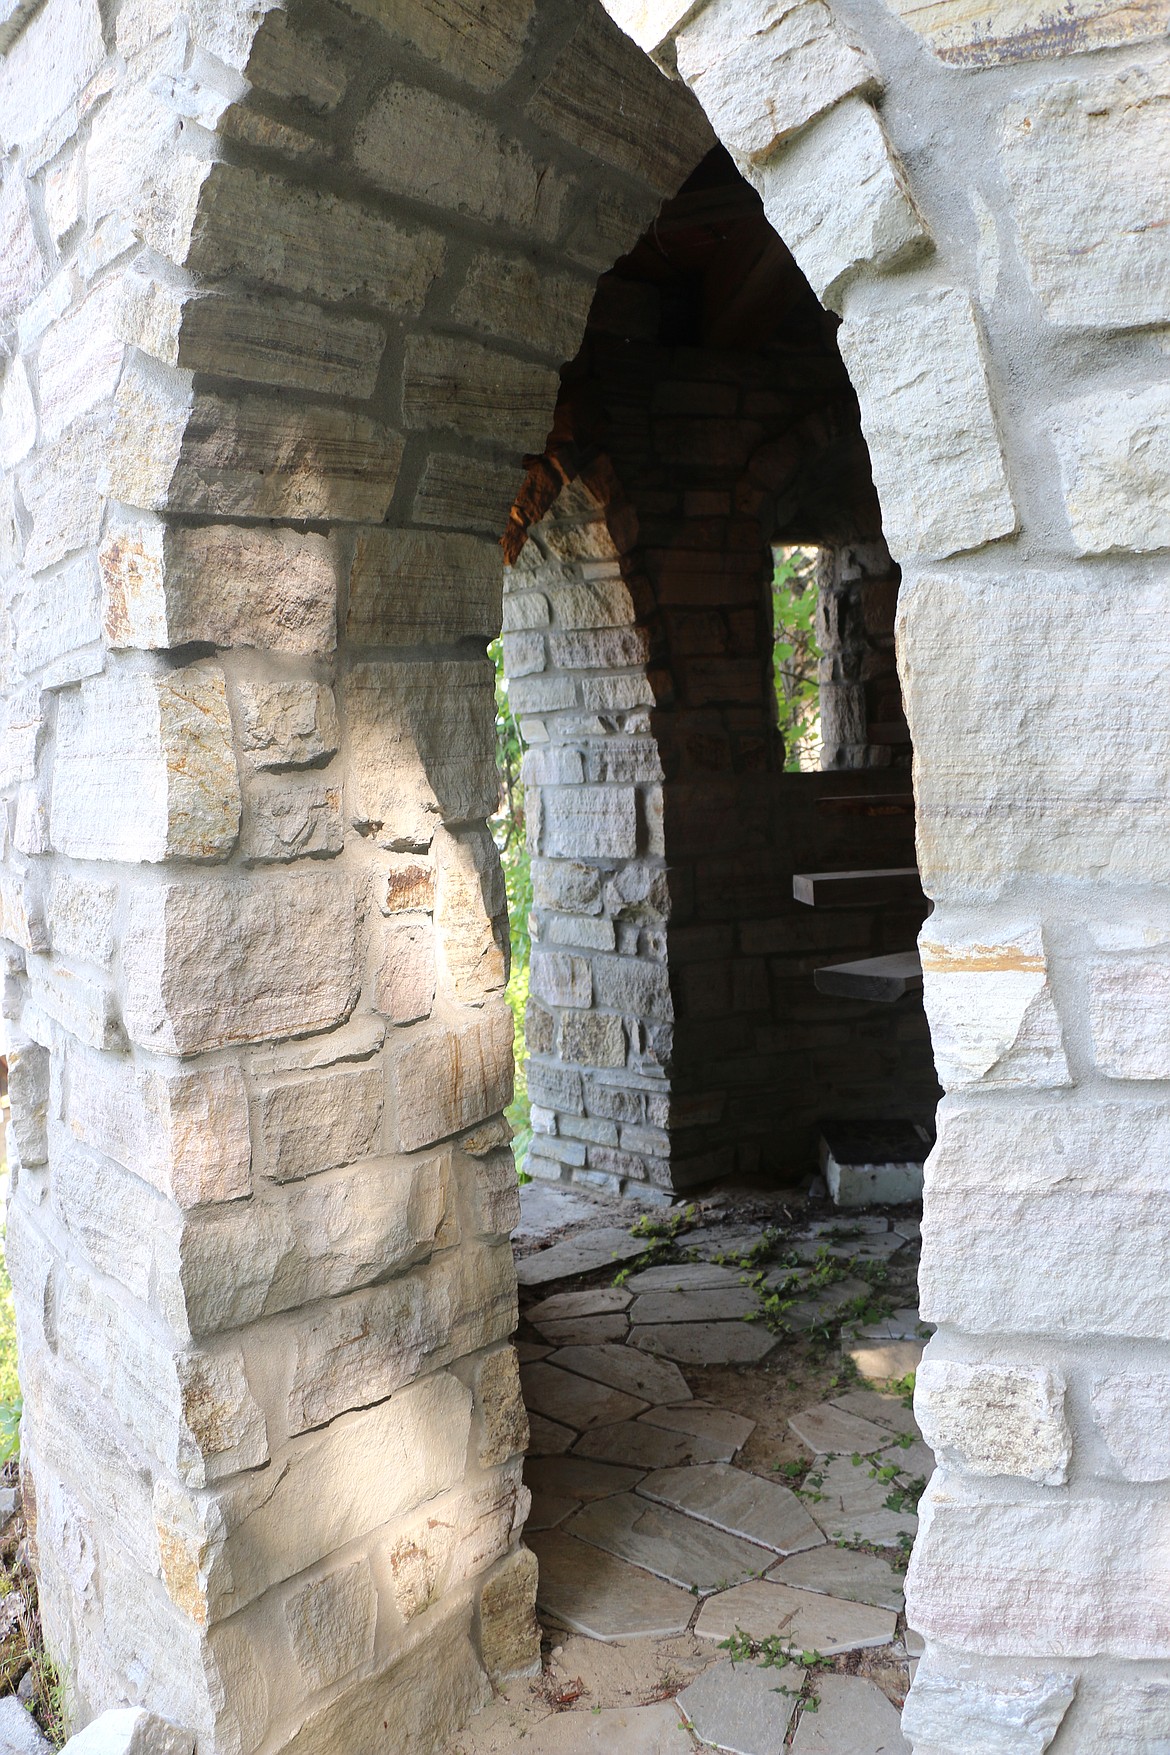 A view of inside a turret on the grounds into of Castle Von Frandsen in the Bottle Bay area.